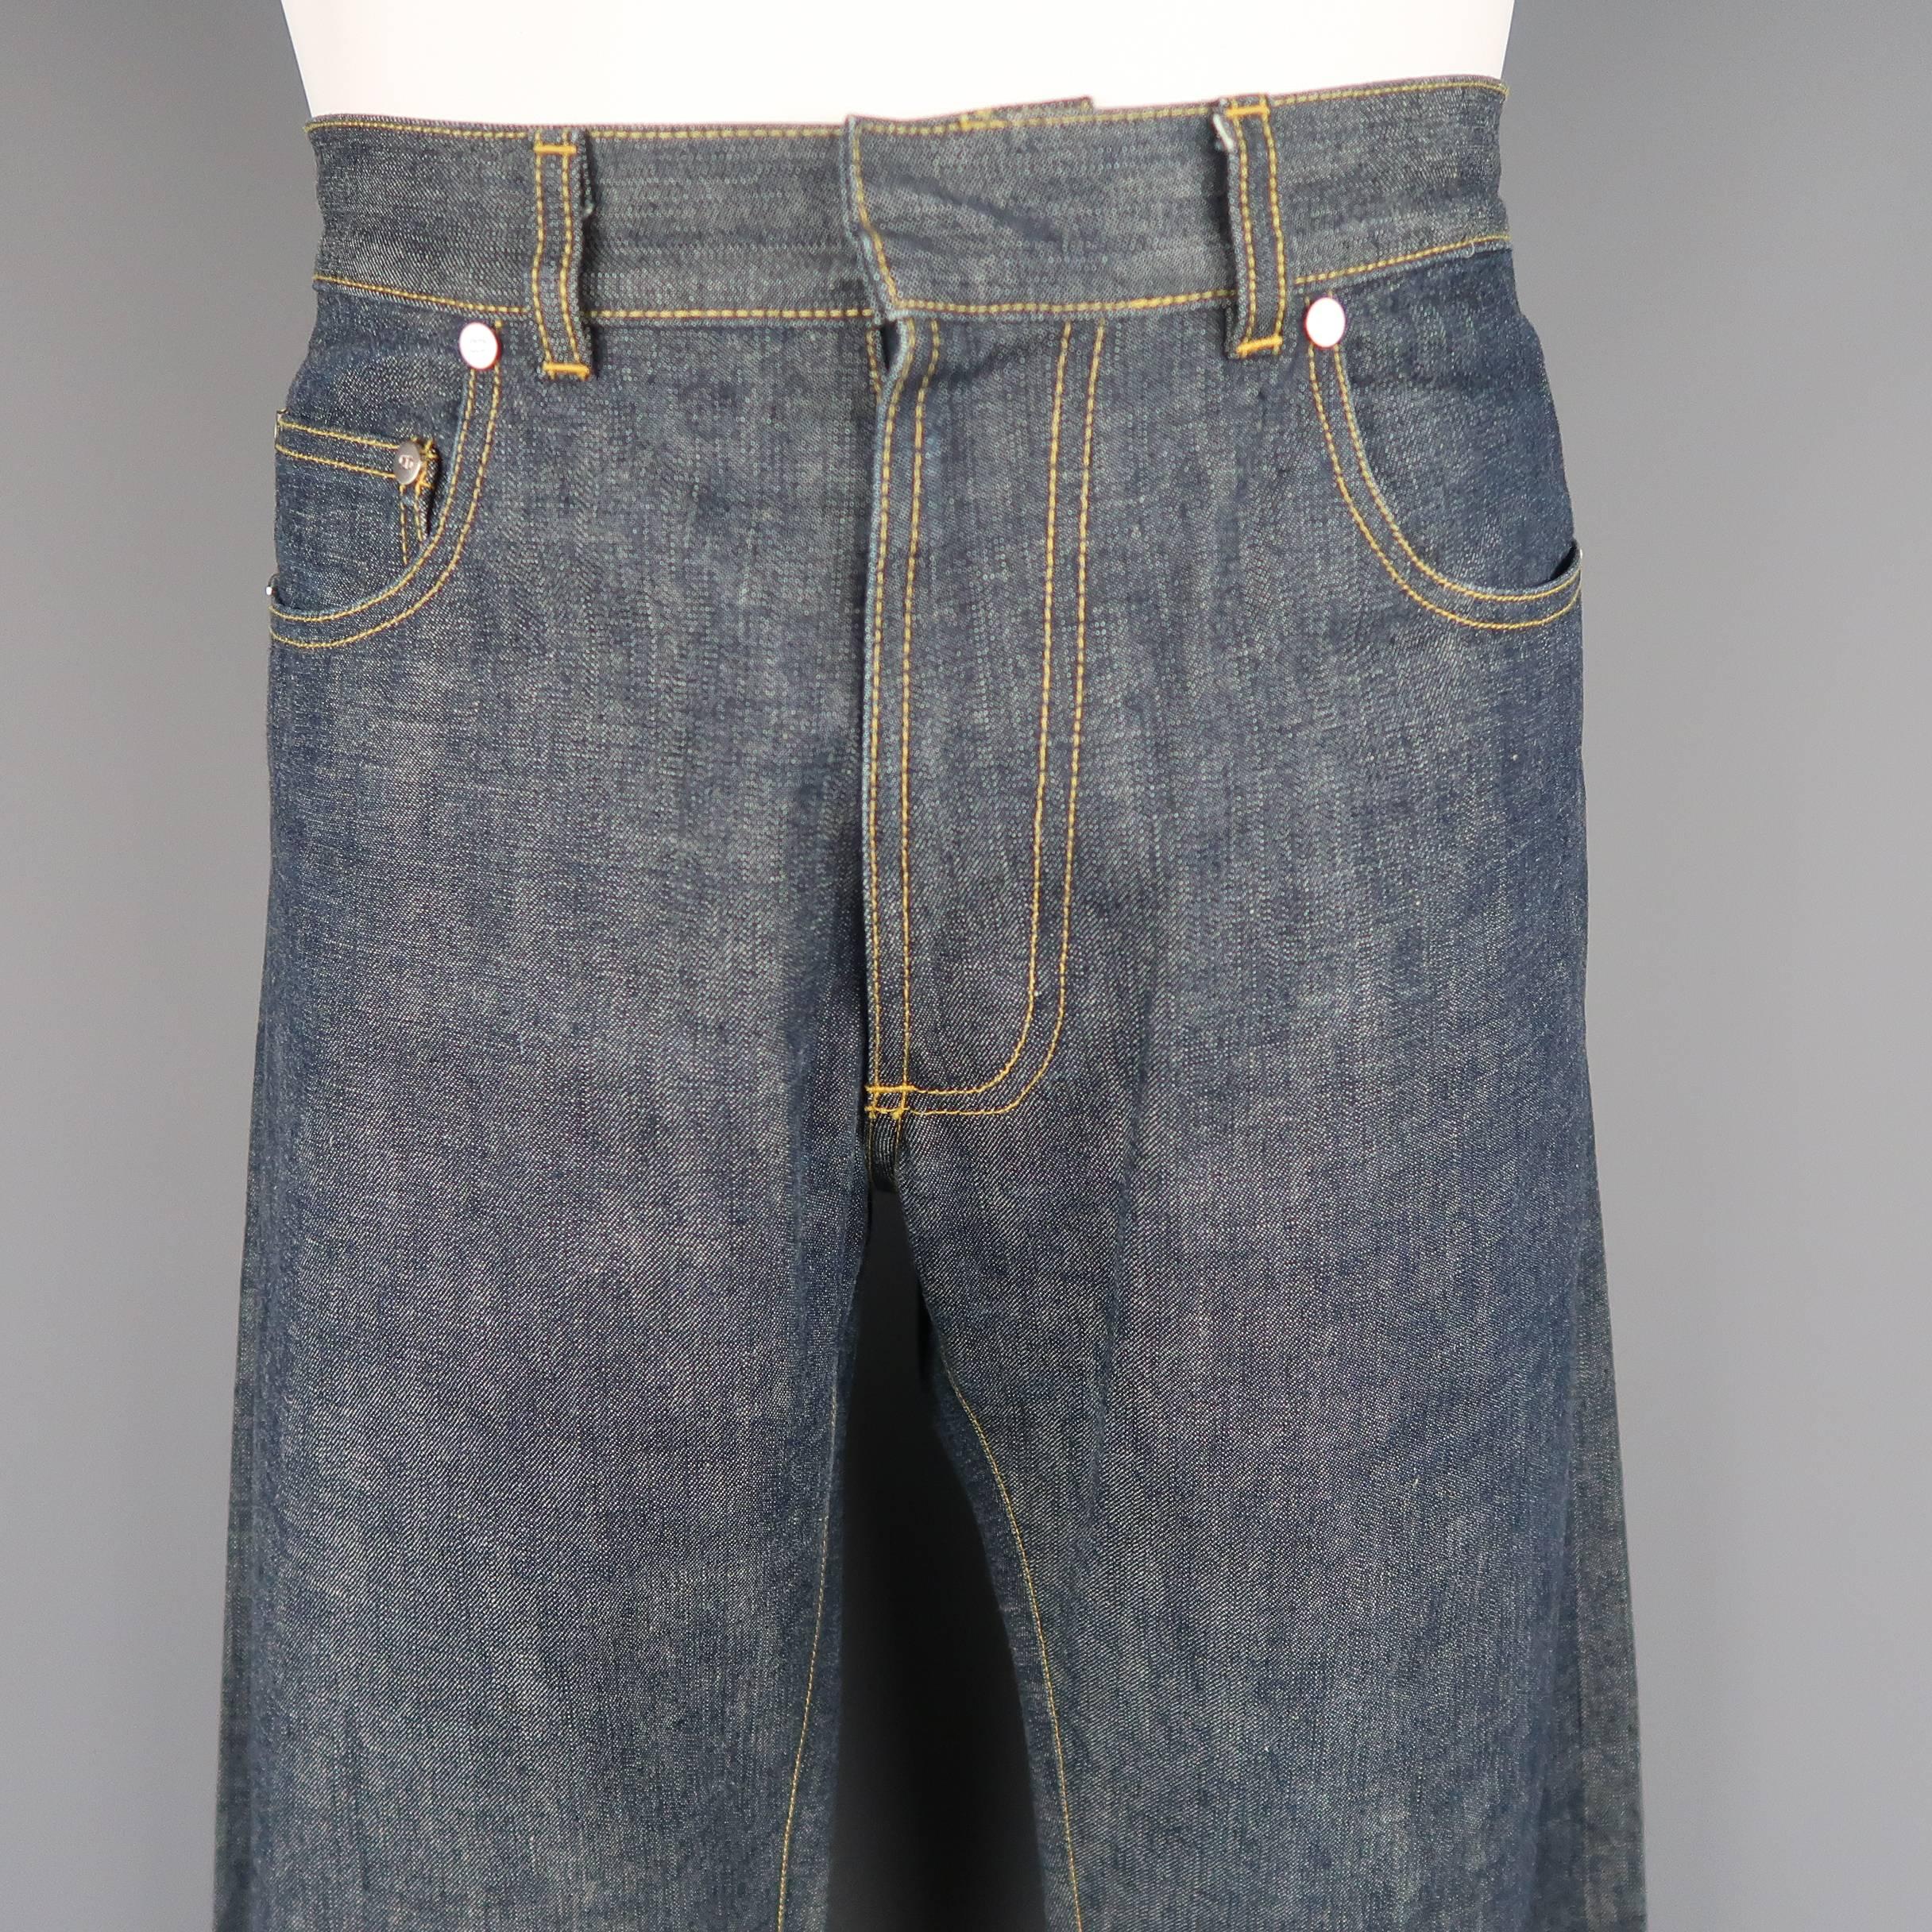 DIOR HOMME straight leg jeans come in a light weight ash blue selvedge denim with yellow contrast stitching and silver tone engraved hardware. Mad in France.
 
Excellent Pre-Owned Condition.
Marked: 48
 
Measurements:
 
Waist: 34 in.
Rise: 9.5